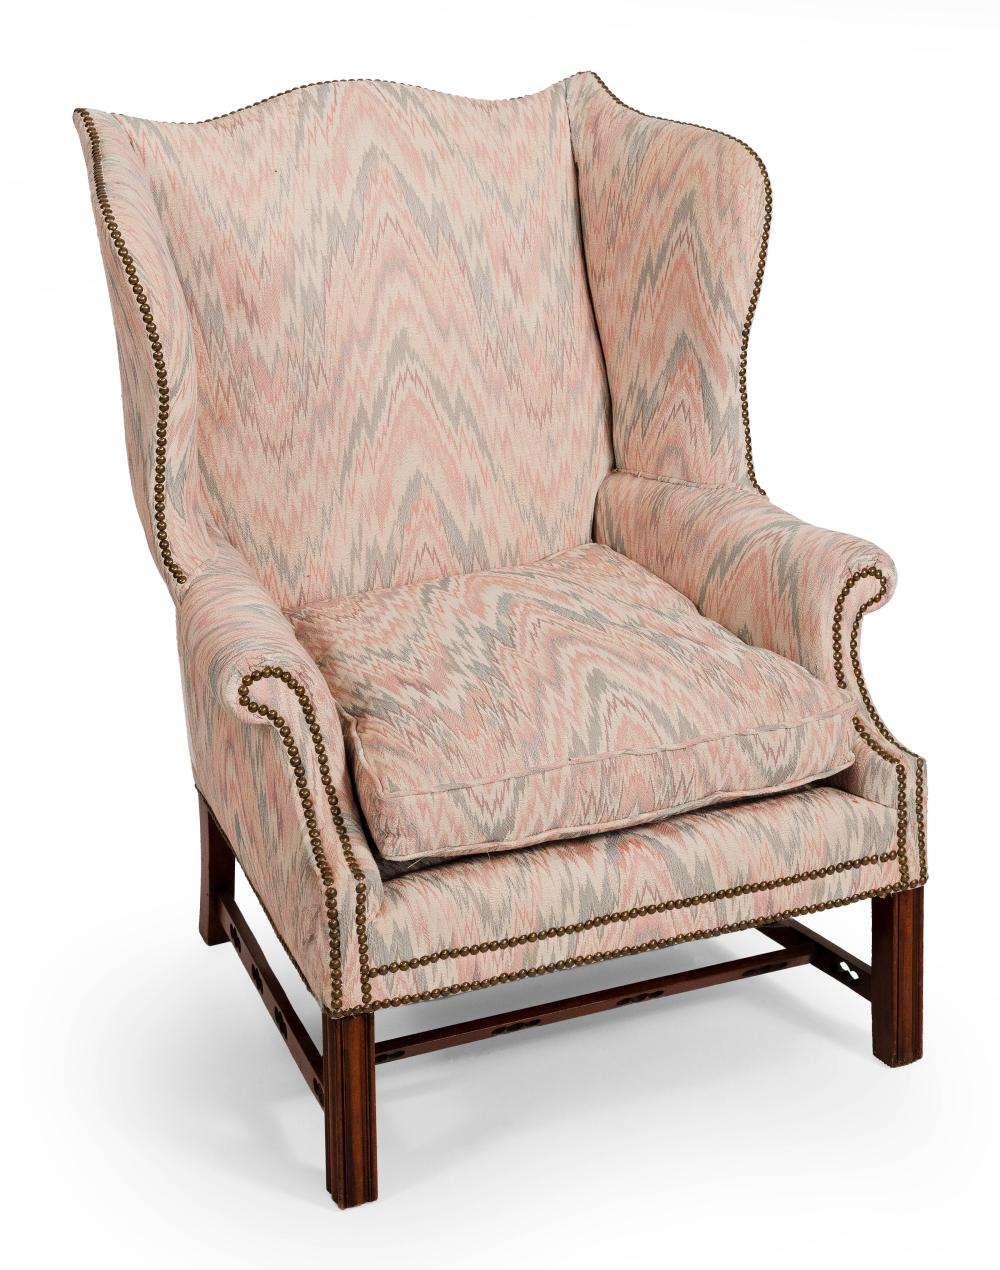 CHIPPENDALE STYLE WING CHAIR WITH 34ede2